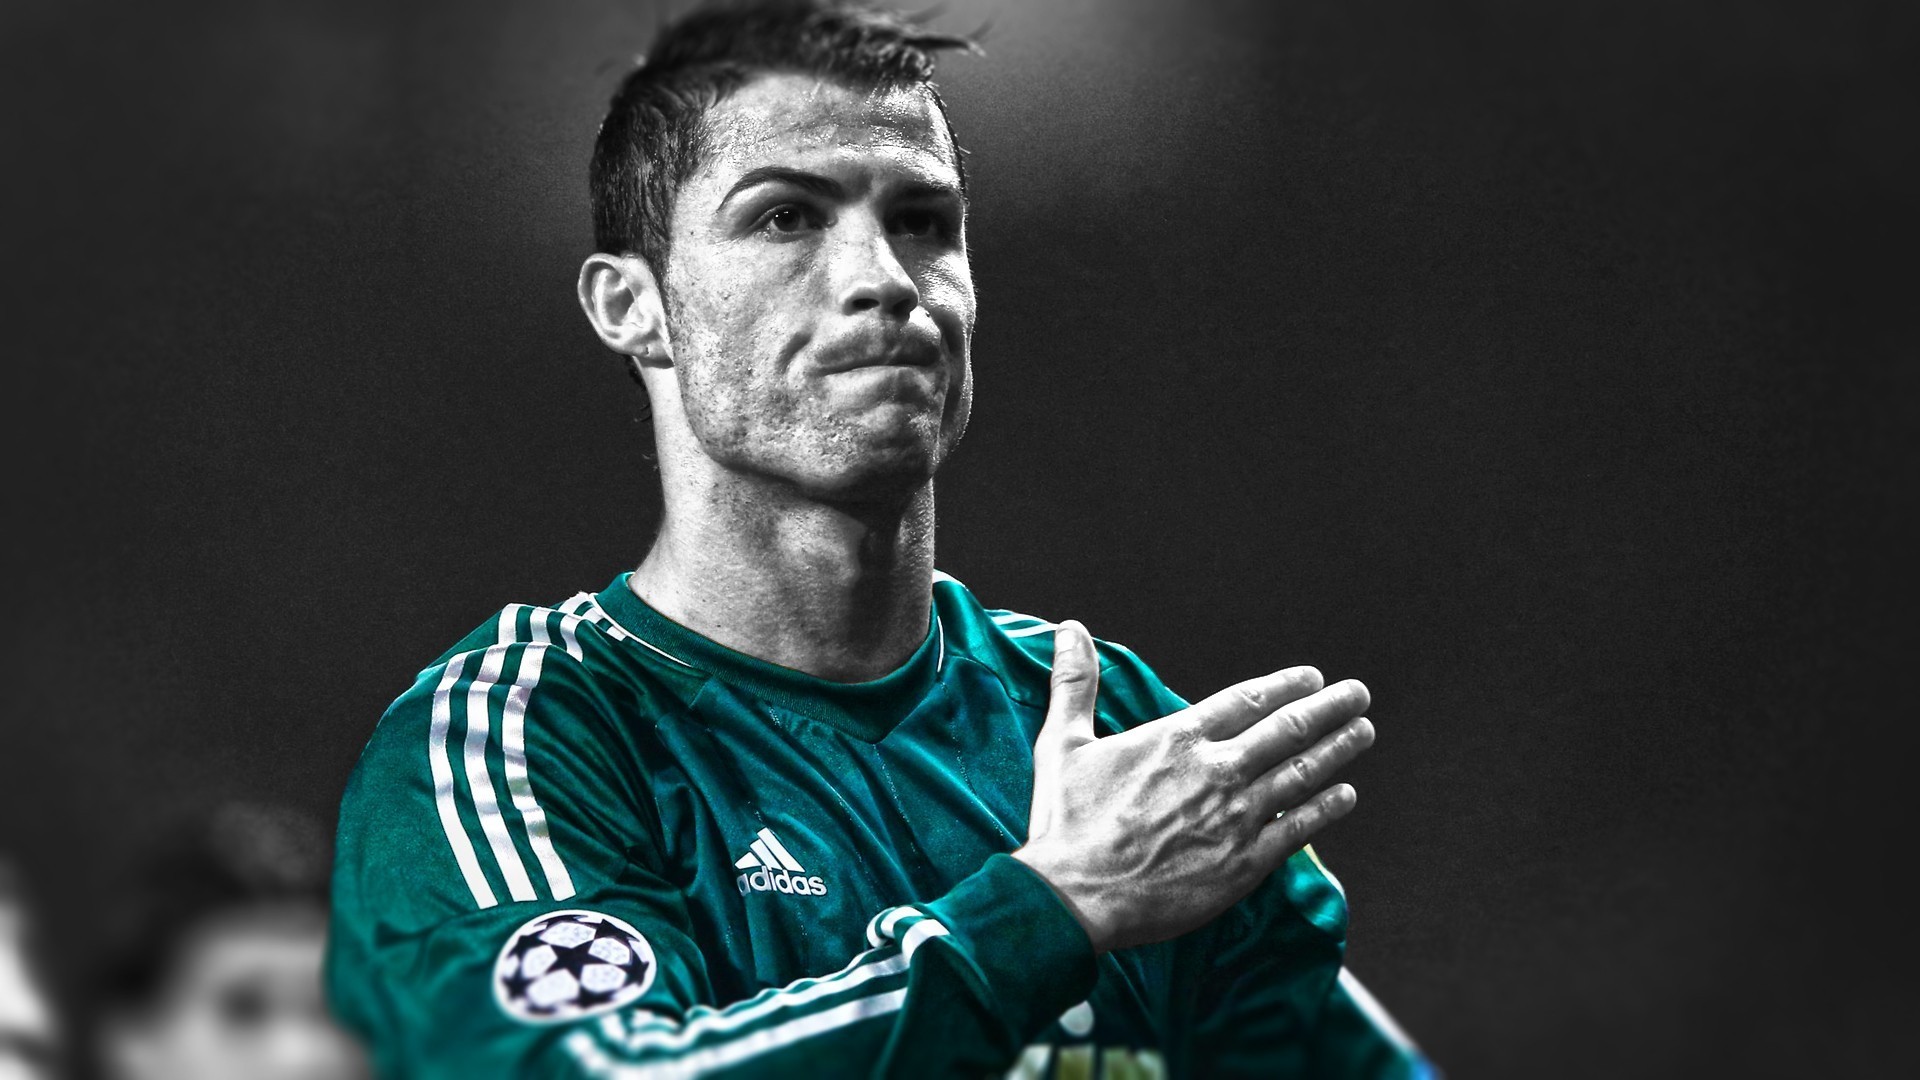 1920x1080 Cristiano Ronaldo HD Wallpapers & Pictures